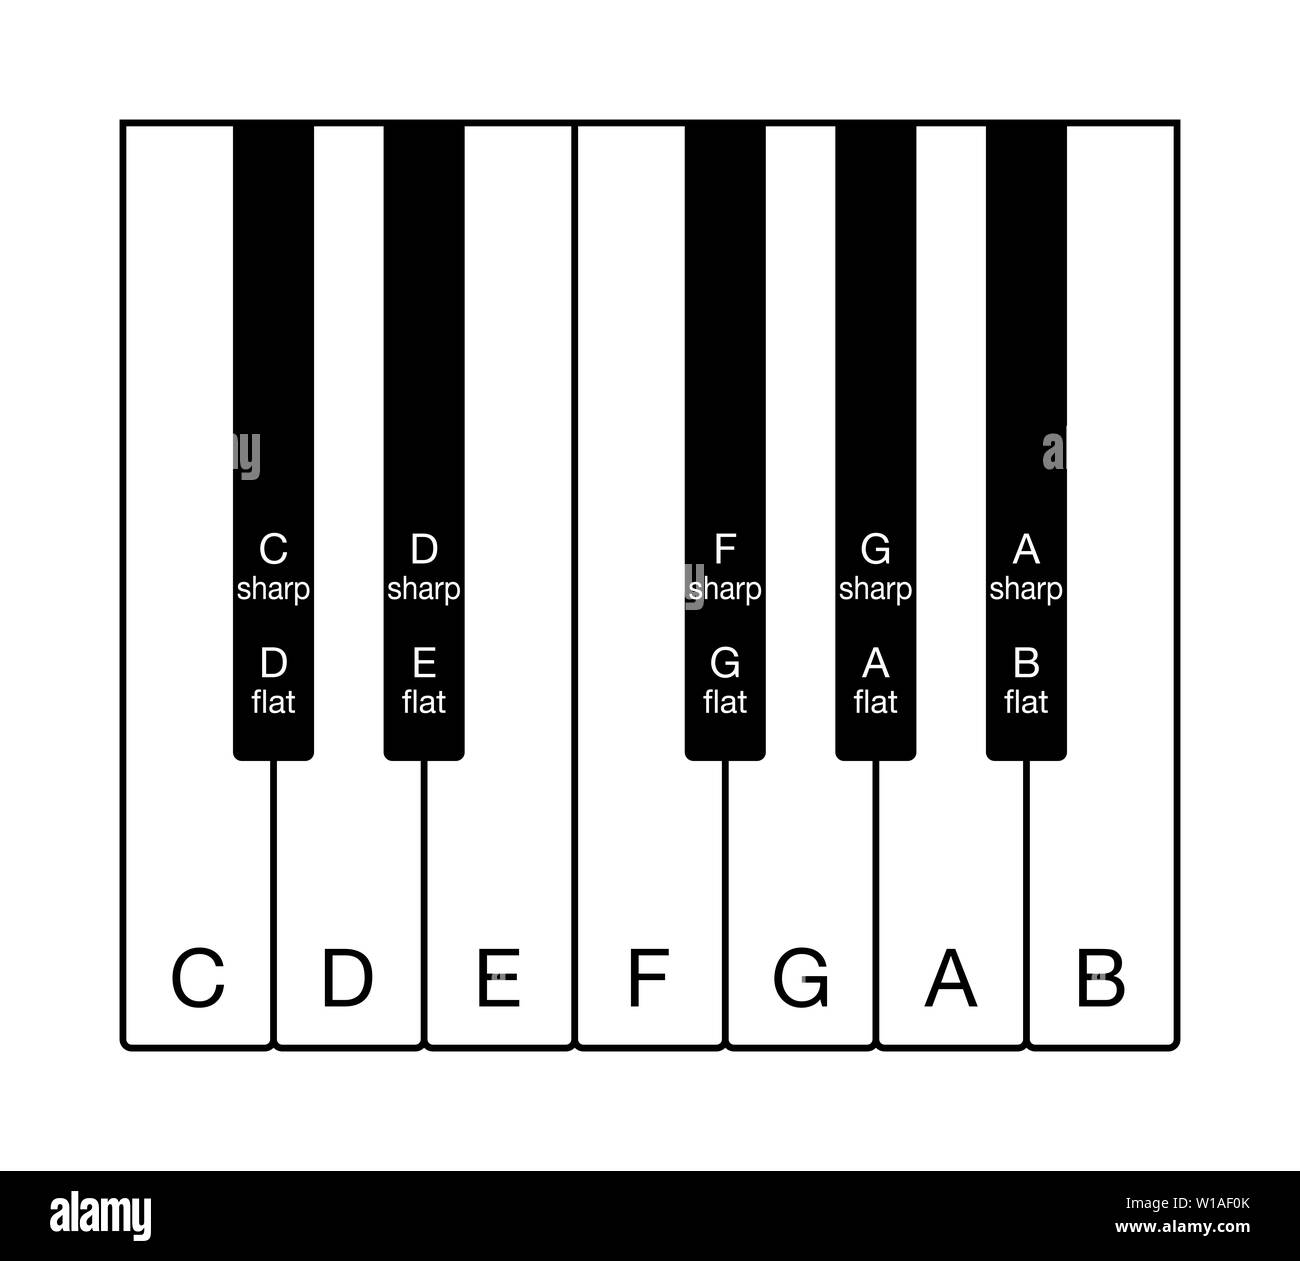 Twelve-tone chromatic scale on a keyboard. One octave of notes of the Western musical scale. Twelve keys from C to B with note names in English. Stock Photo